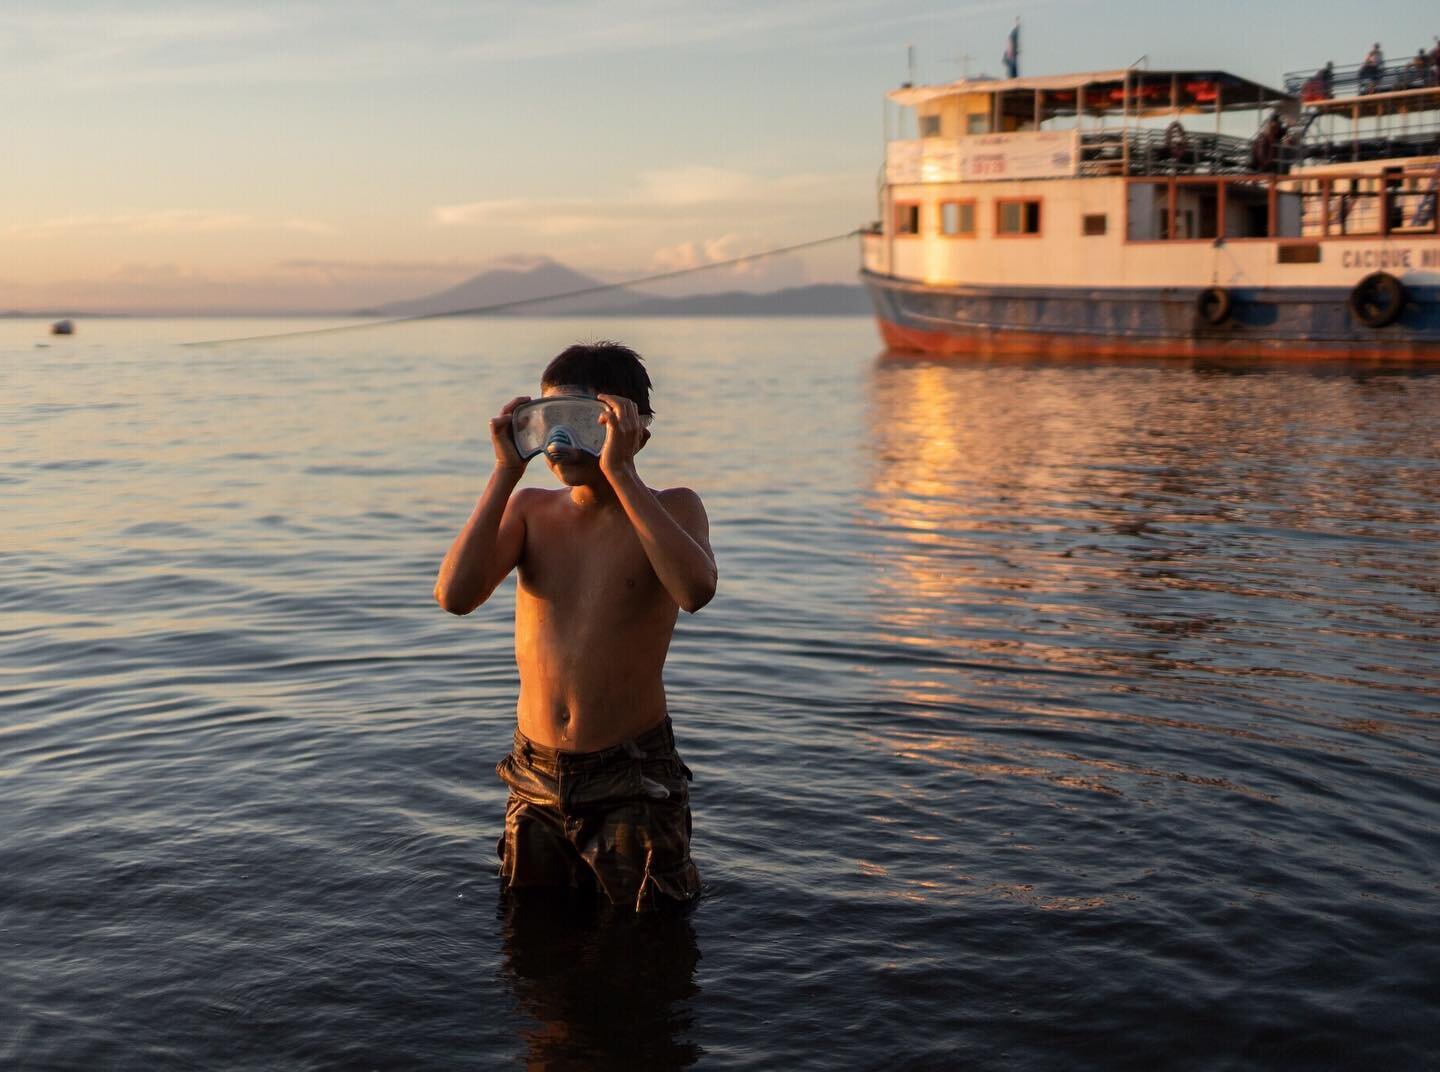 Juan comes to the Moyogalpa port more often since his cousin lent him this snorkel. He claims that one day, when he has money, he will buy it from him. The water is muddy, and he can&rsquo;t see much. After the swim, he shakes from the cold, and he d